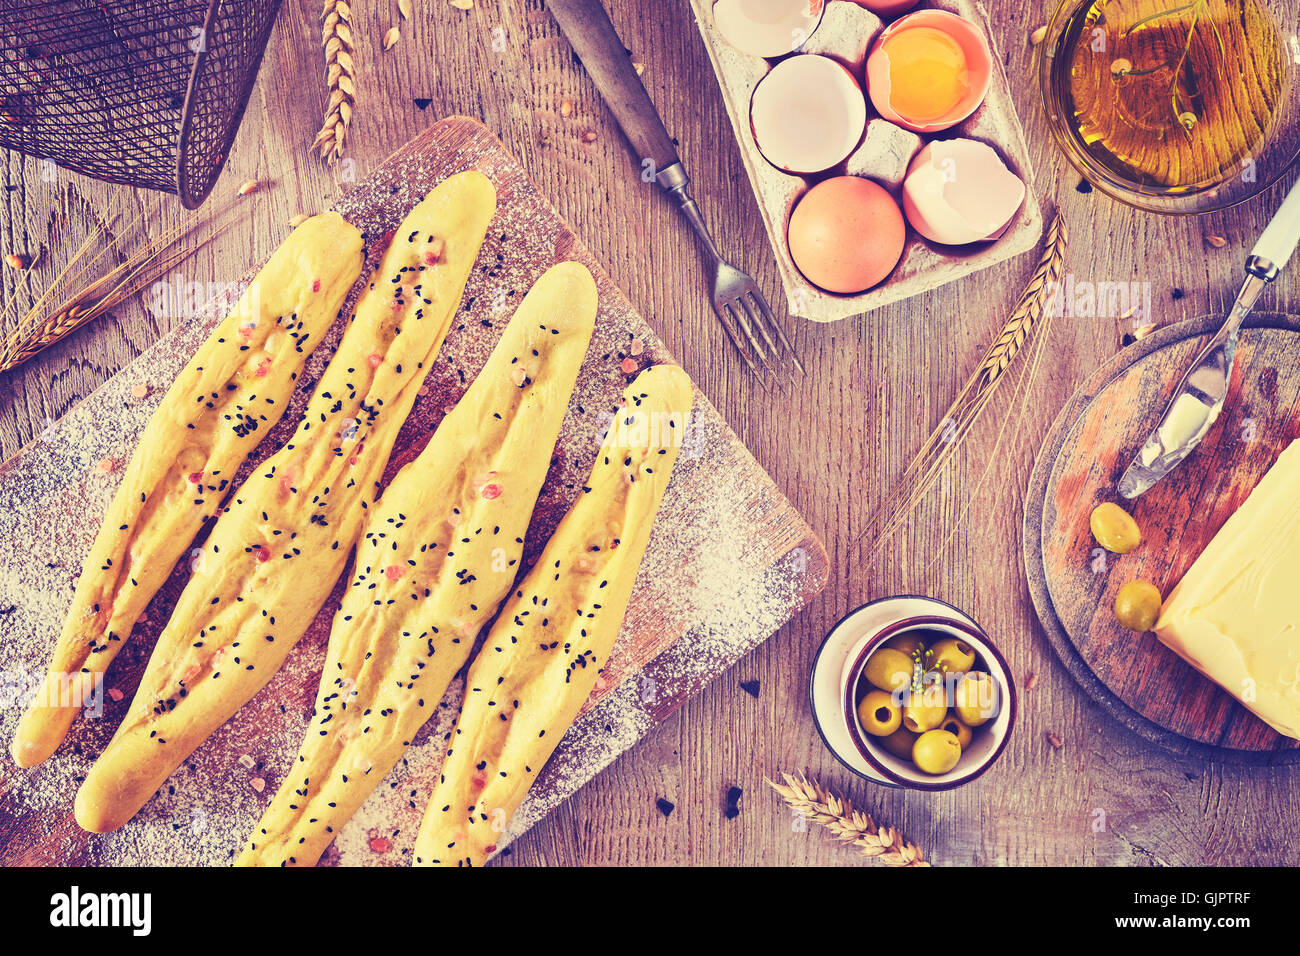 Vintage toned bread sticks ready for baking, rustic setting on a wooden table. Stock Photo